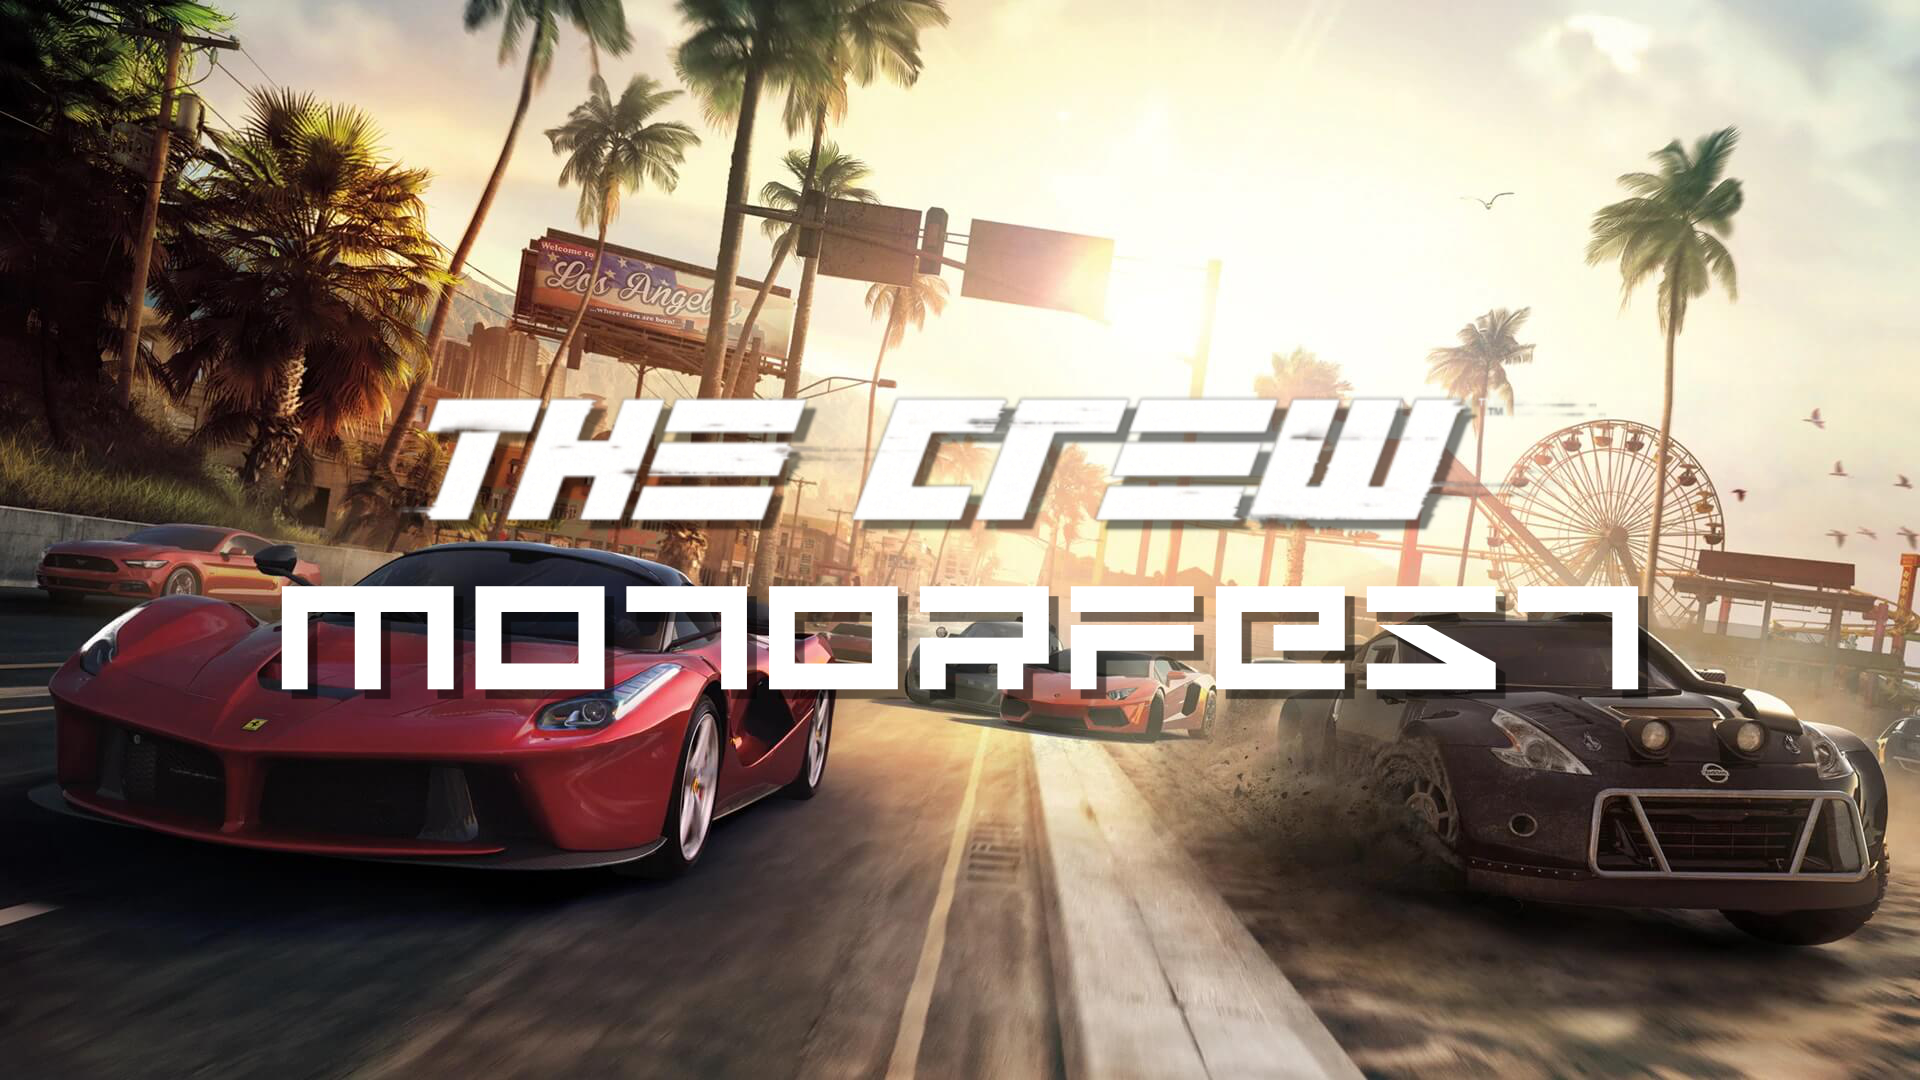 The Crew 3 will use a new game engine according to datamine